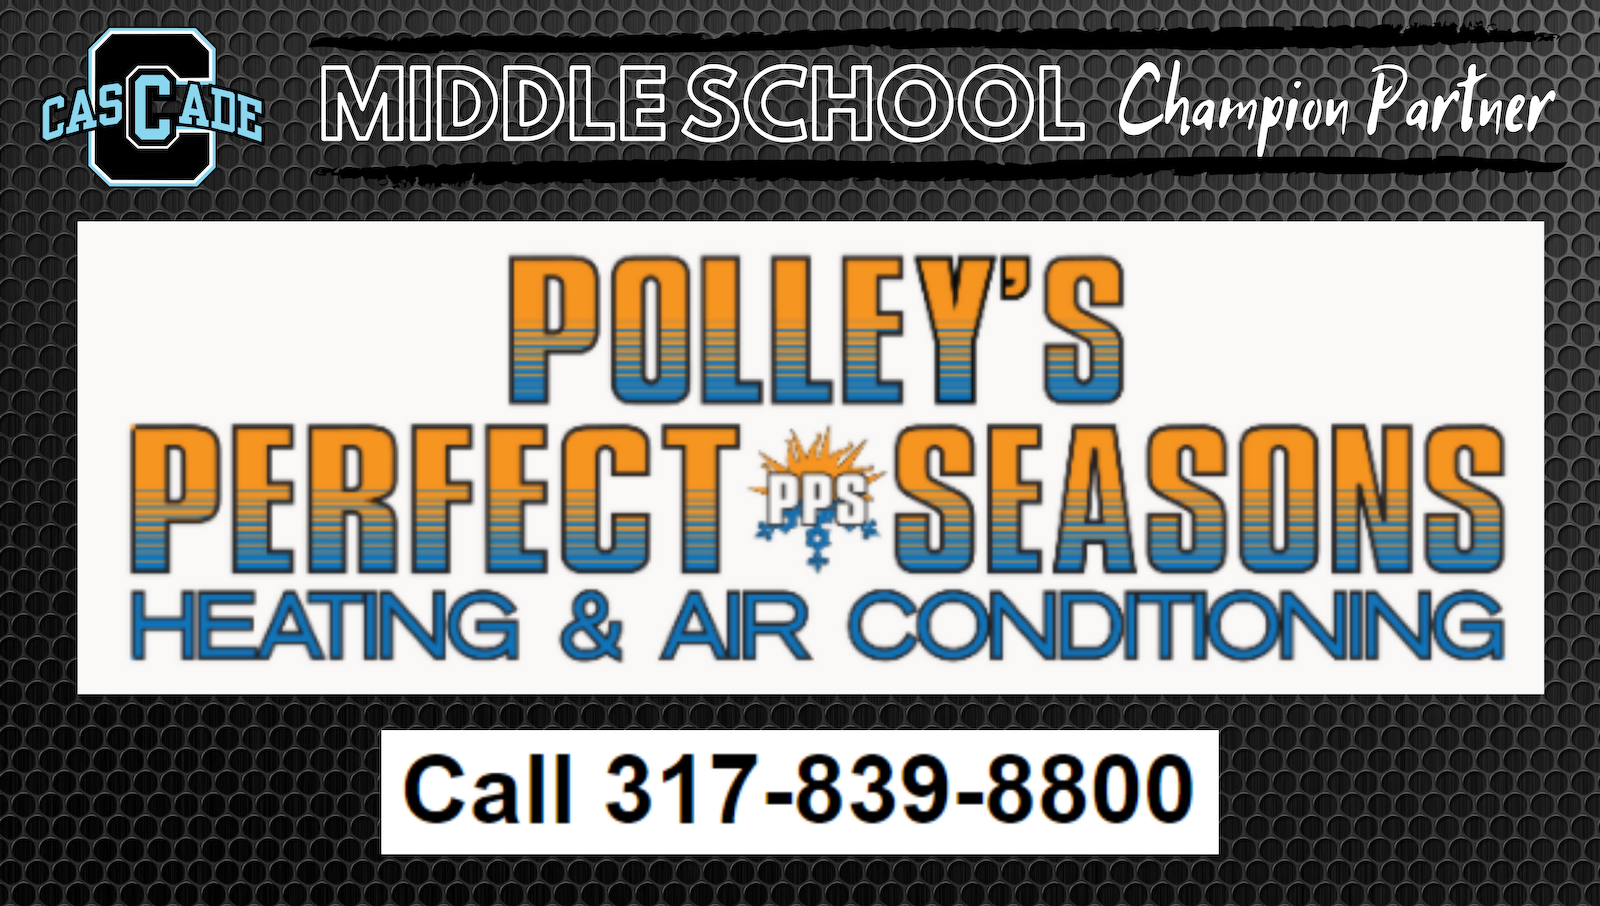 Polley's Perfect Seasons